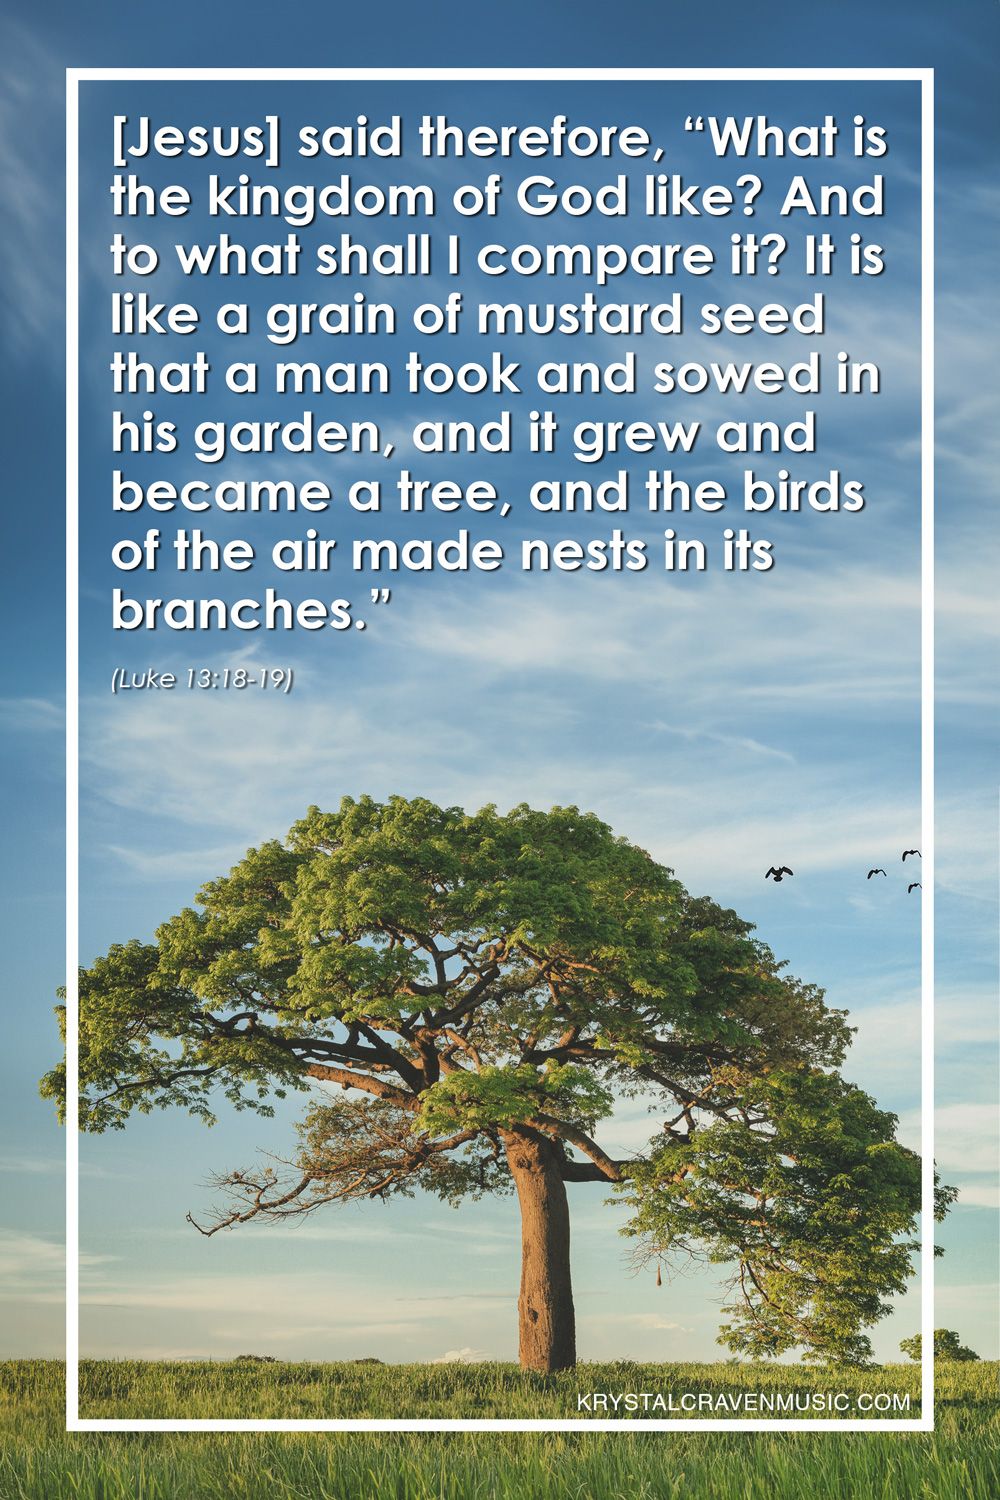 The text from Luke 13:18-19 "[Jesus] said therefore, “What is the kingdom of God like? And to what shall I compare it? It is like a grain of mustard seed that a man took and sowed in his garden, and it grew and became a tree, and the birds of the air made nests in its branches." over a large tree growing in a grassy field with birds flying near it.